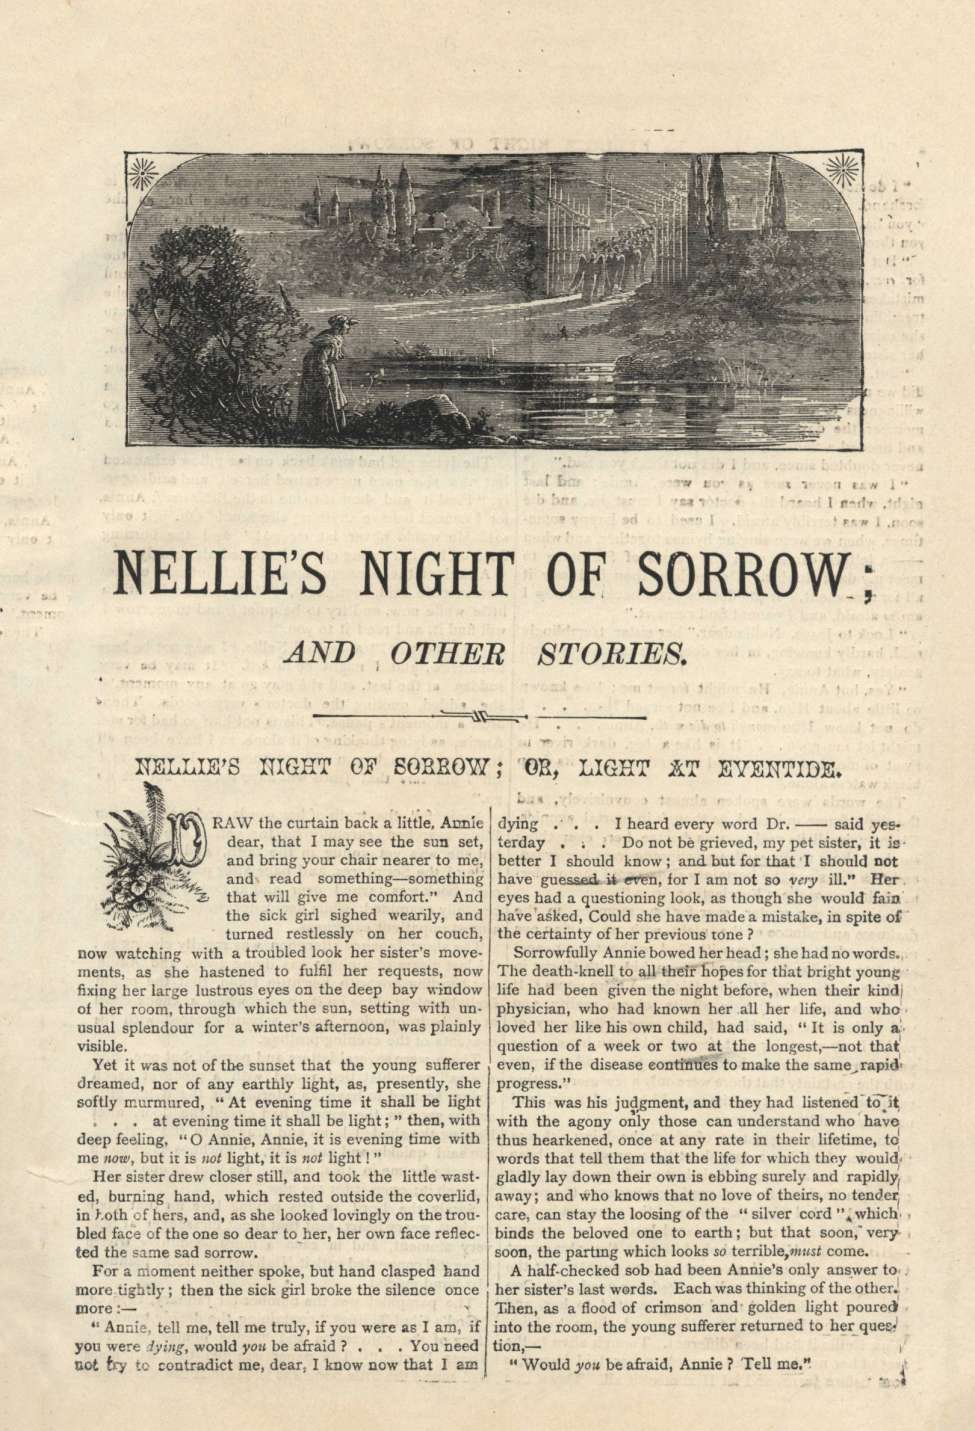 Comic Book Cover For Horner's Penny Stories 2 - Nellie's Night of Sorrow